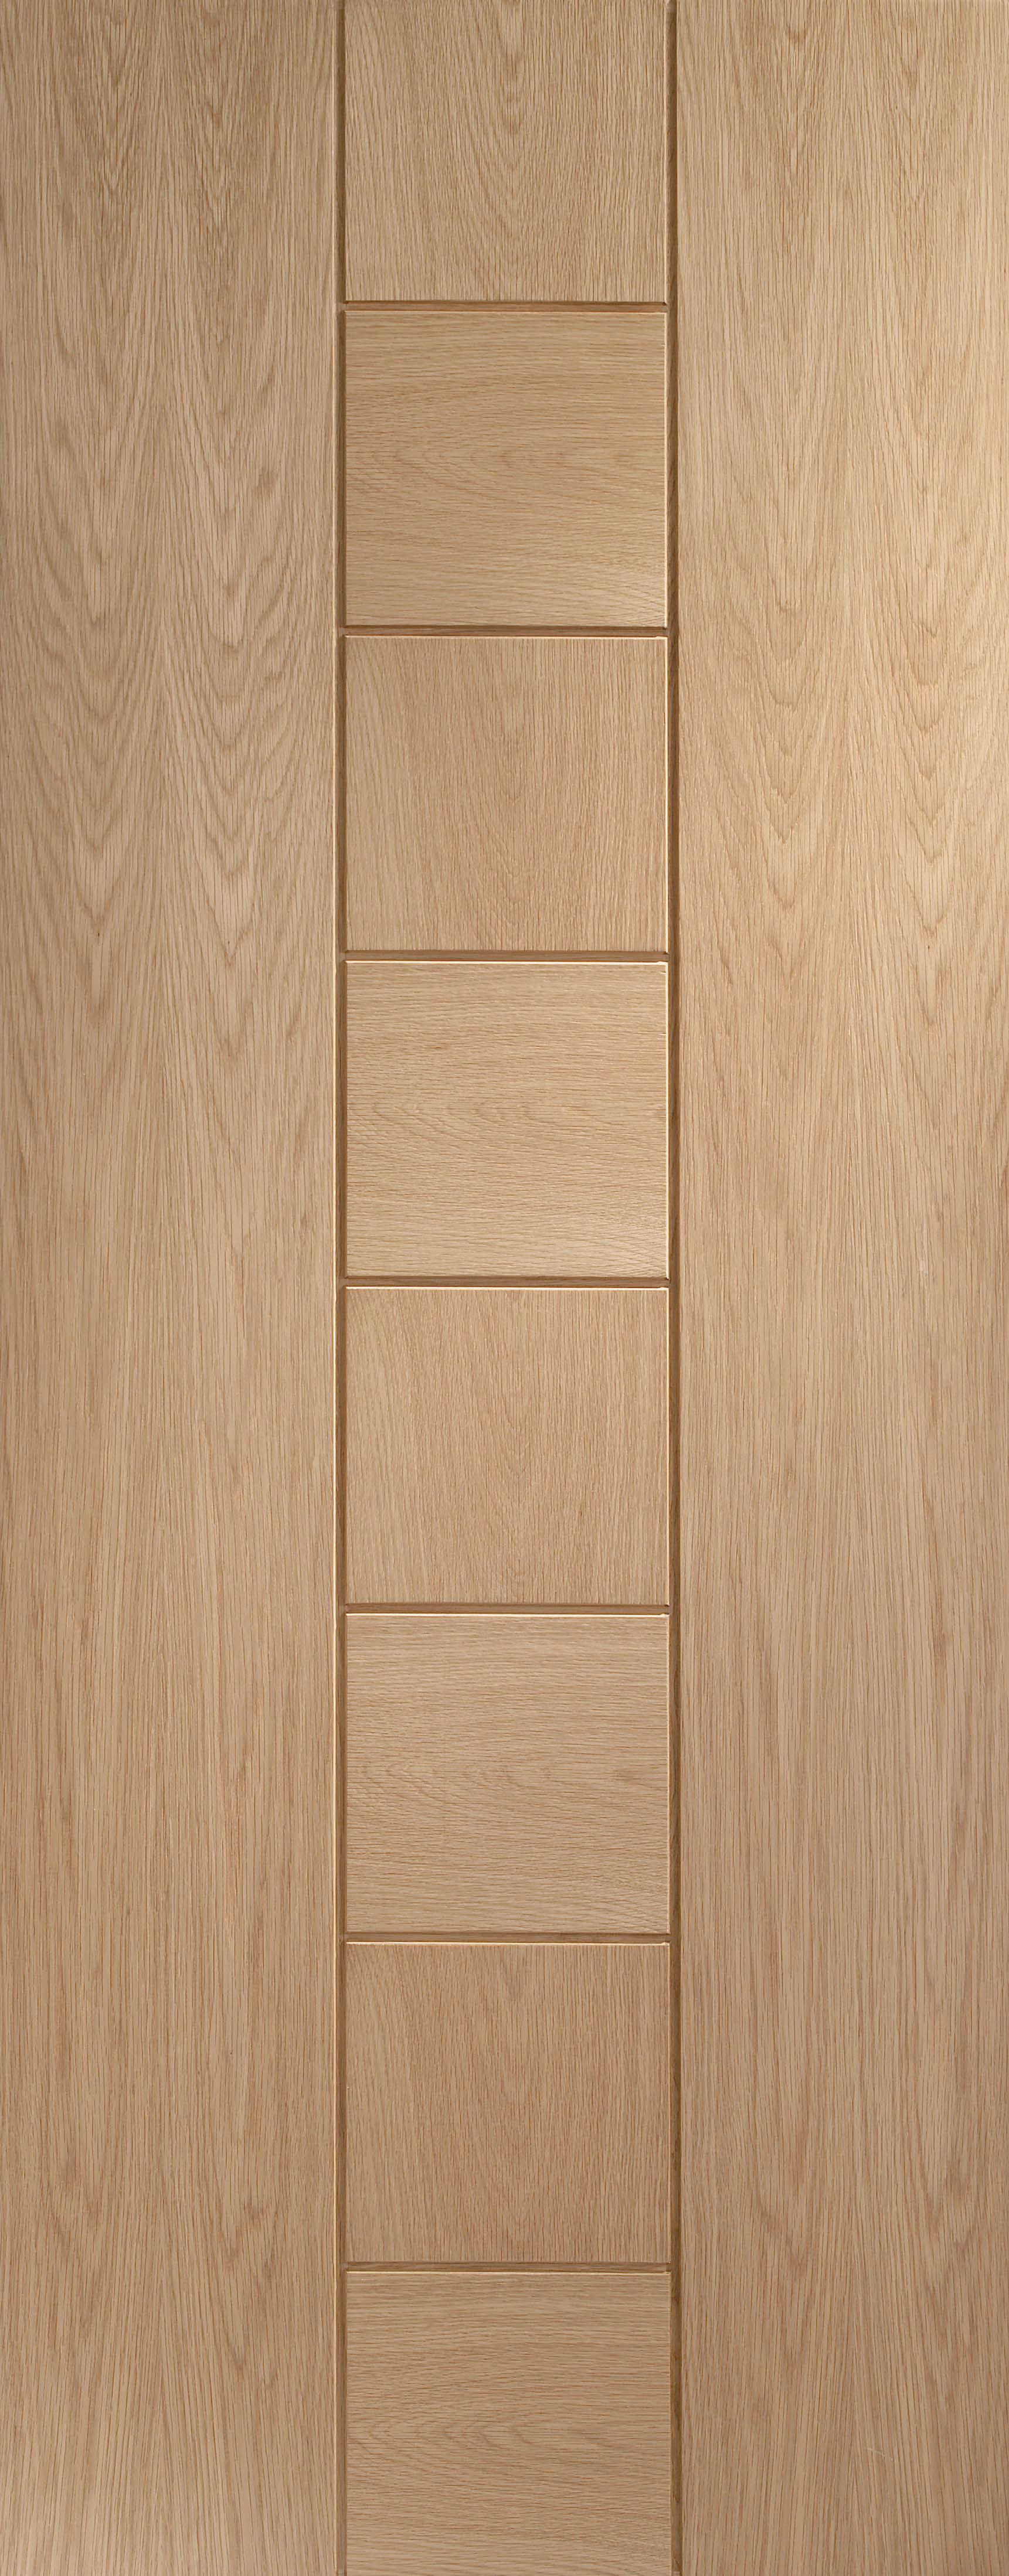 Image of XL Joinery Messina Oak 8 Panel Pre Finished Internal Door - 1981 x 762mm